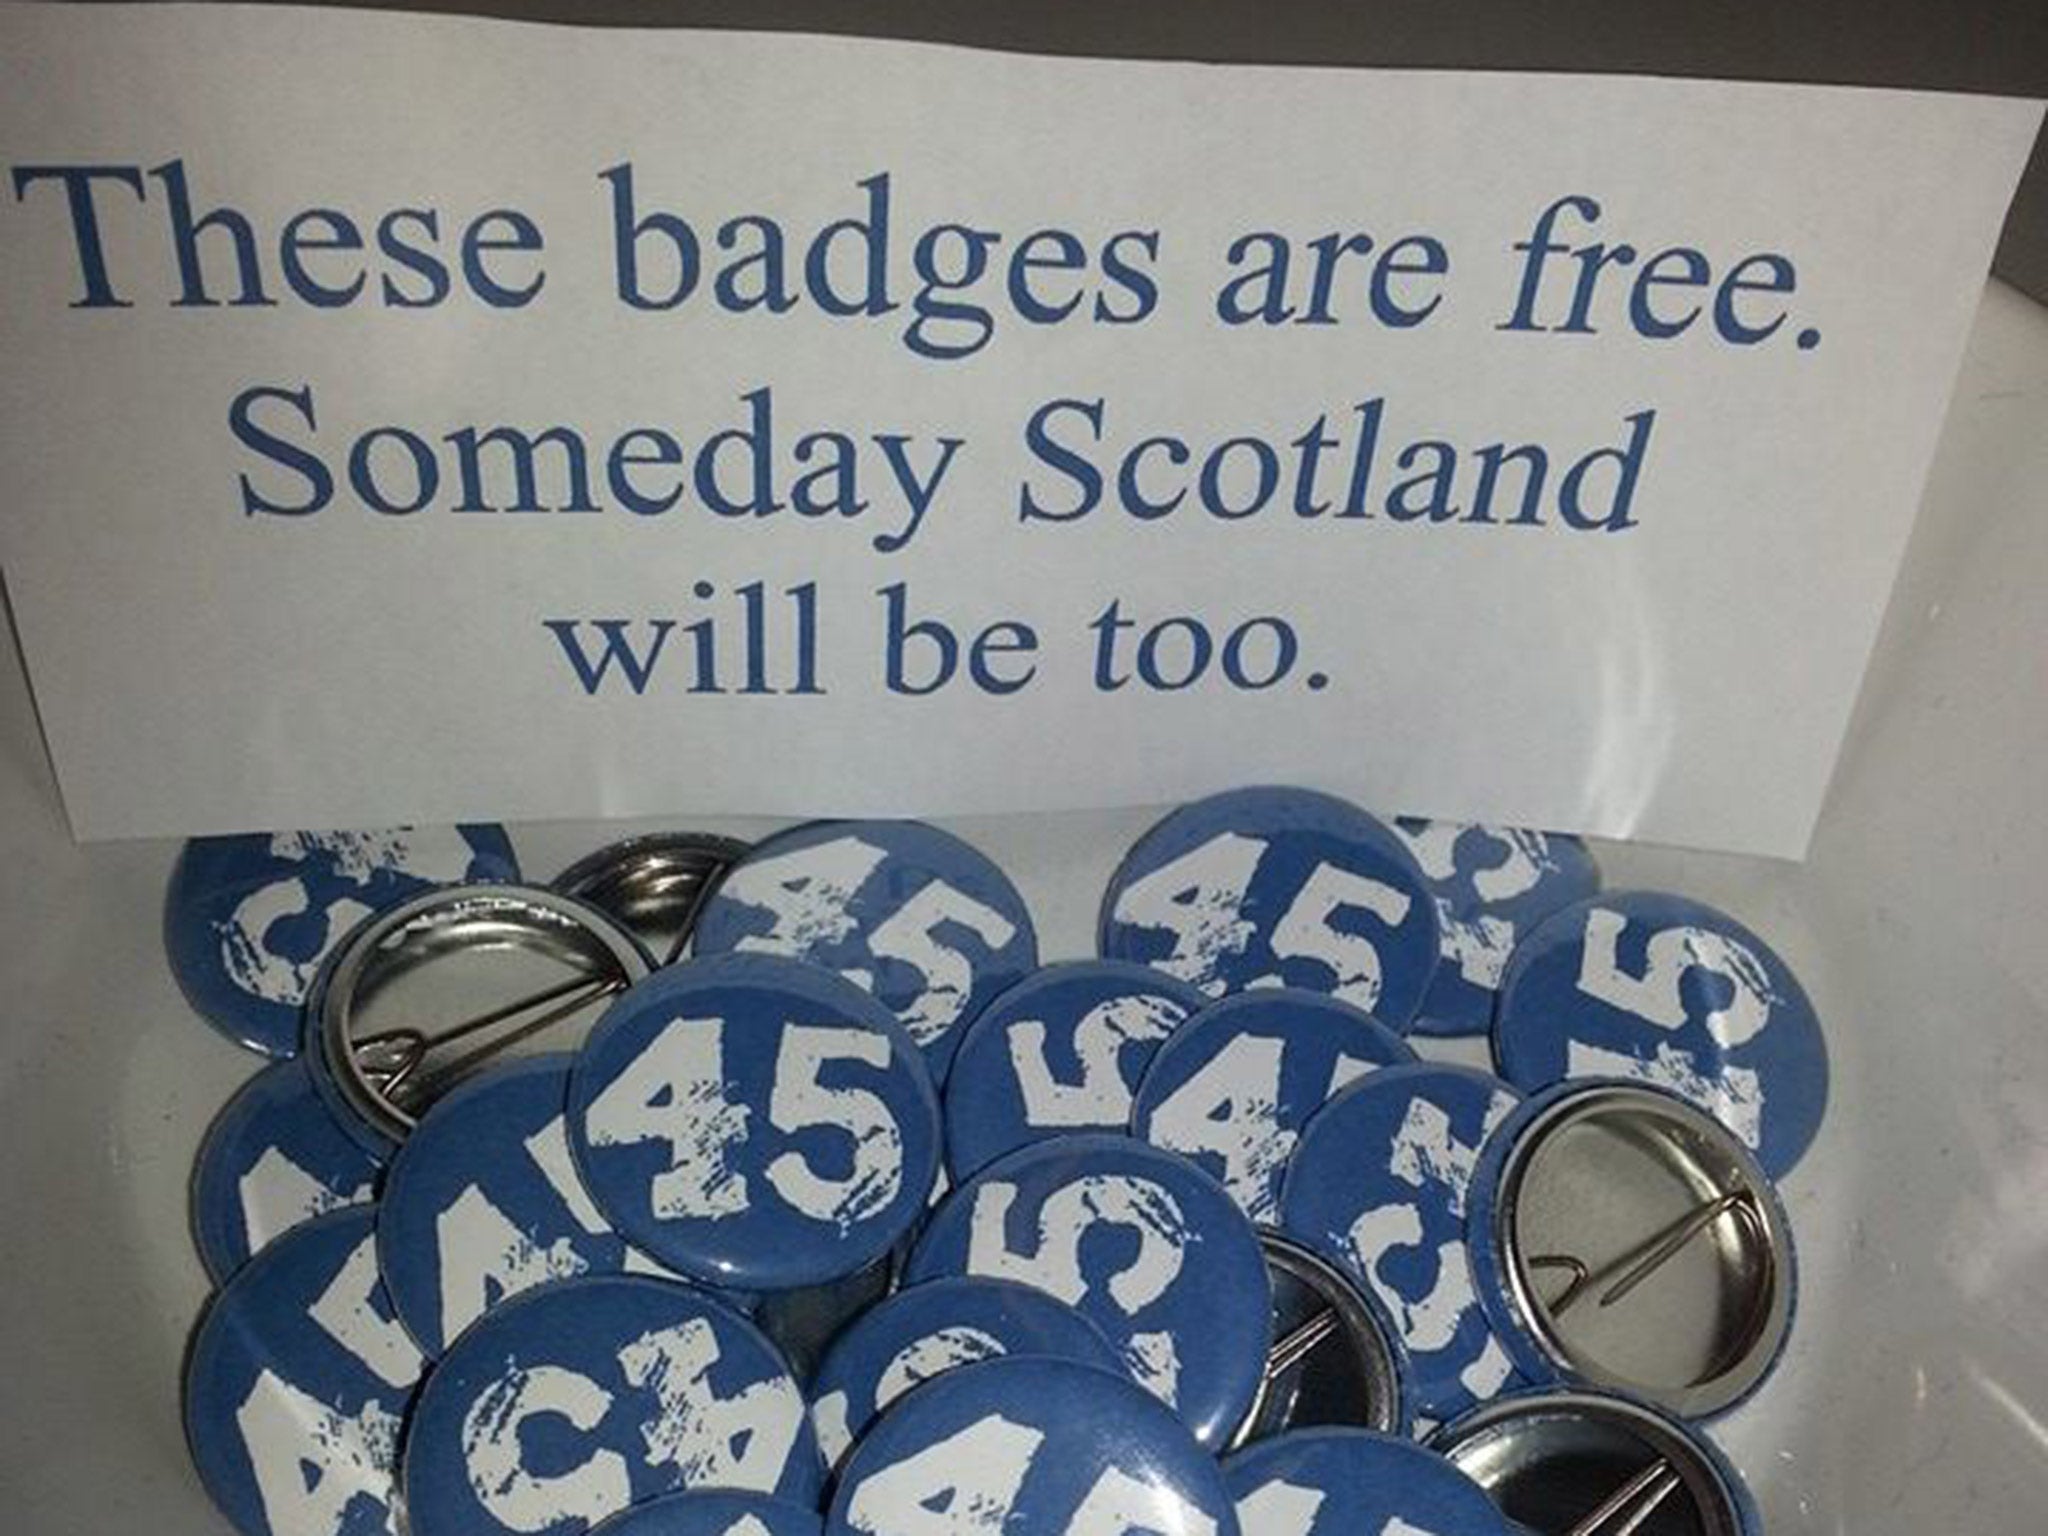 We are the 45 percent badges on offer